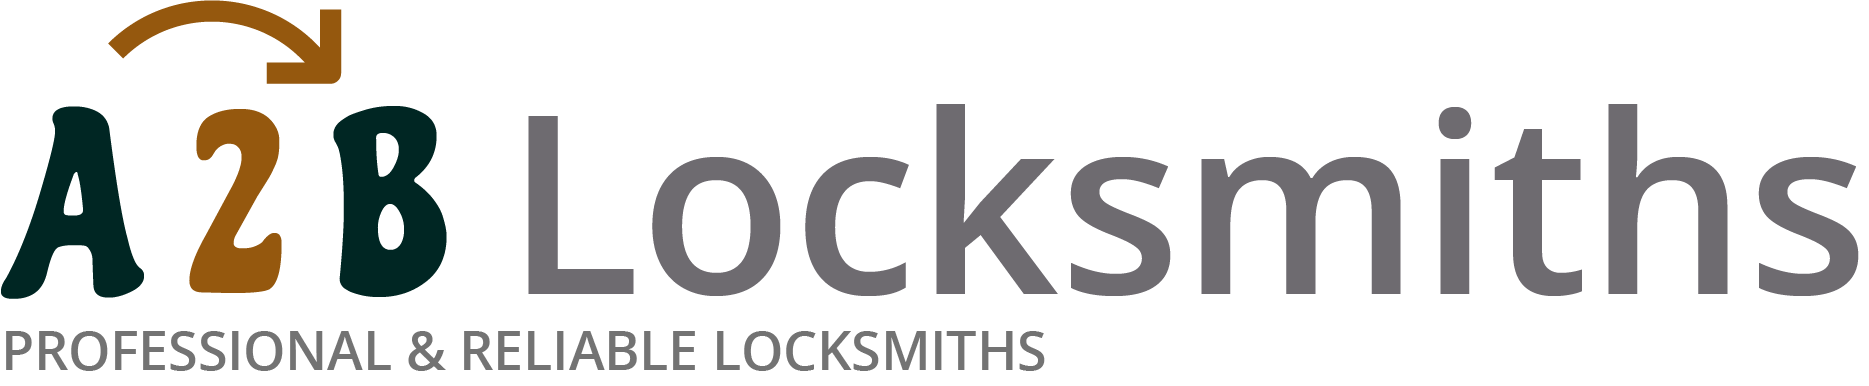 If you are locked out of house in Tewkesbury, our 24/7 local emergency locksmith services can help you.